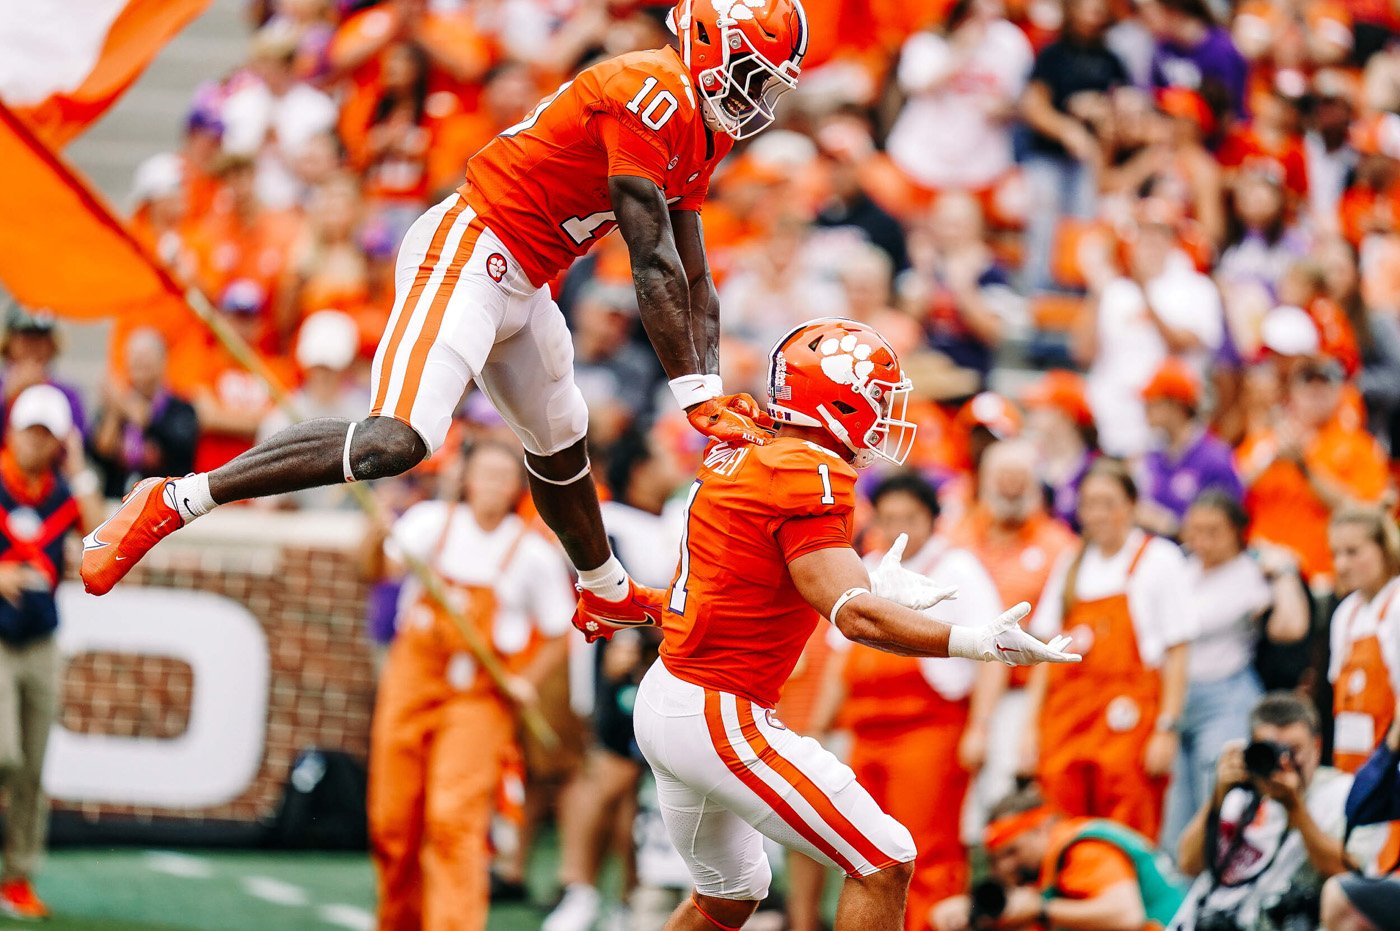 College Football – Clemson opens with win over Furman – SPORTS VIEW AMERICA – "Your Leader In